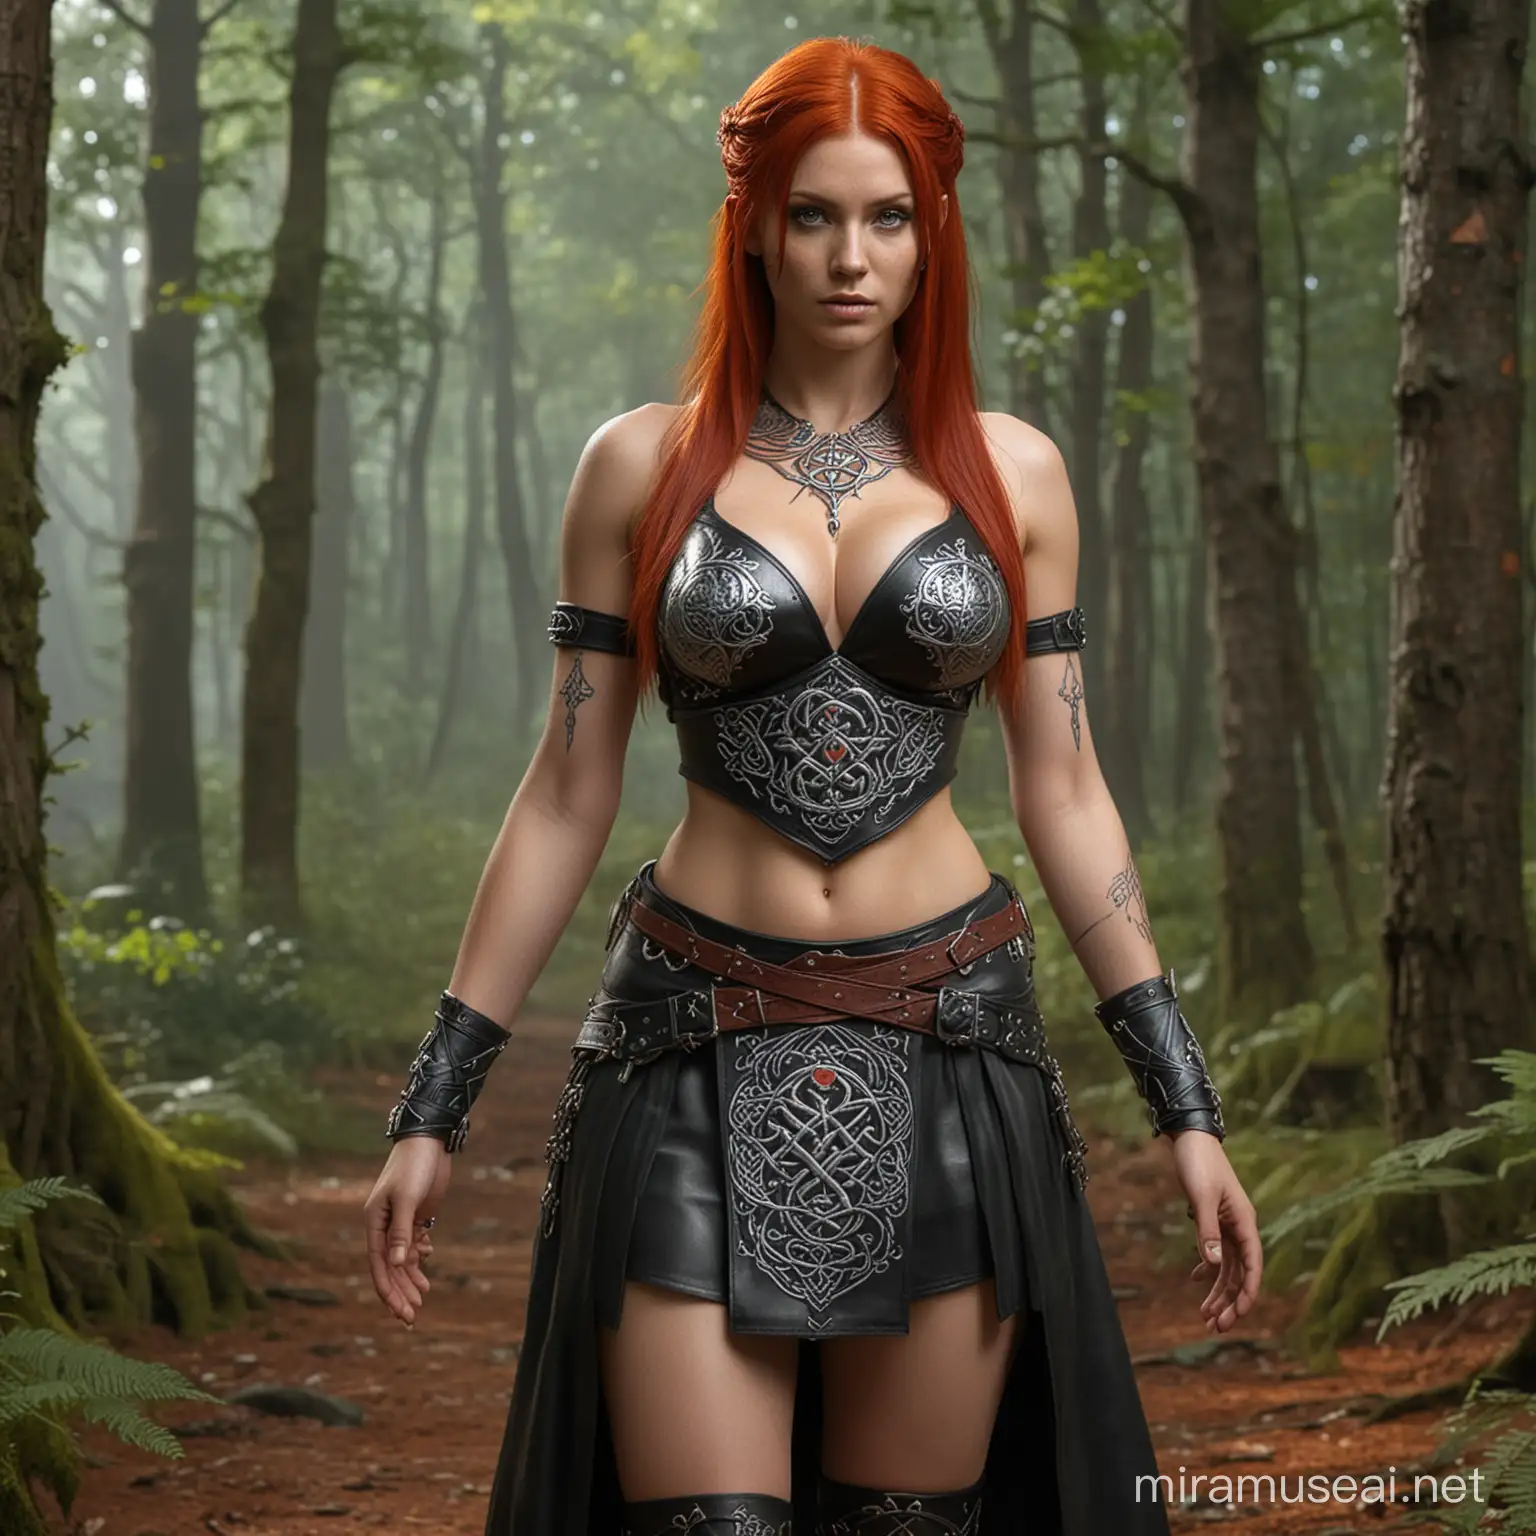 hyperrealistic extreme detail full body long shot showing an anatomically correct female human with large breasts, with fiery red hair decorated with silver, draconic symbols carved into the skin on arms and body. wearing a minimal sleeveless open front leather top that is engraved with celtic runes. wearing a short loose skirt embroided with colourful elven symbols. in a forest